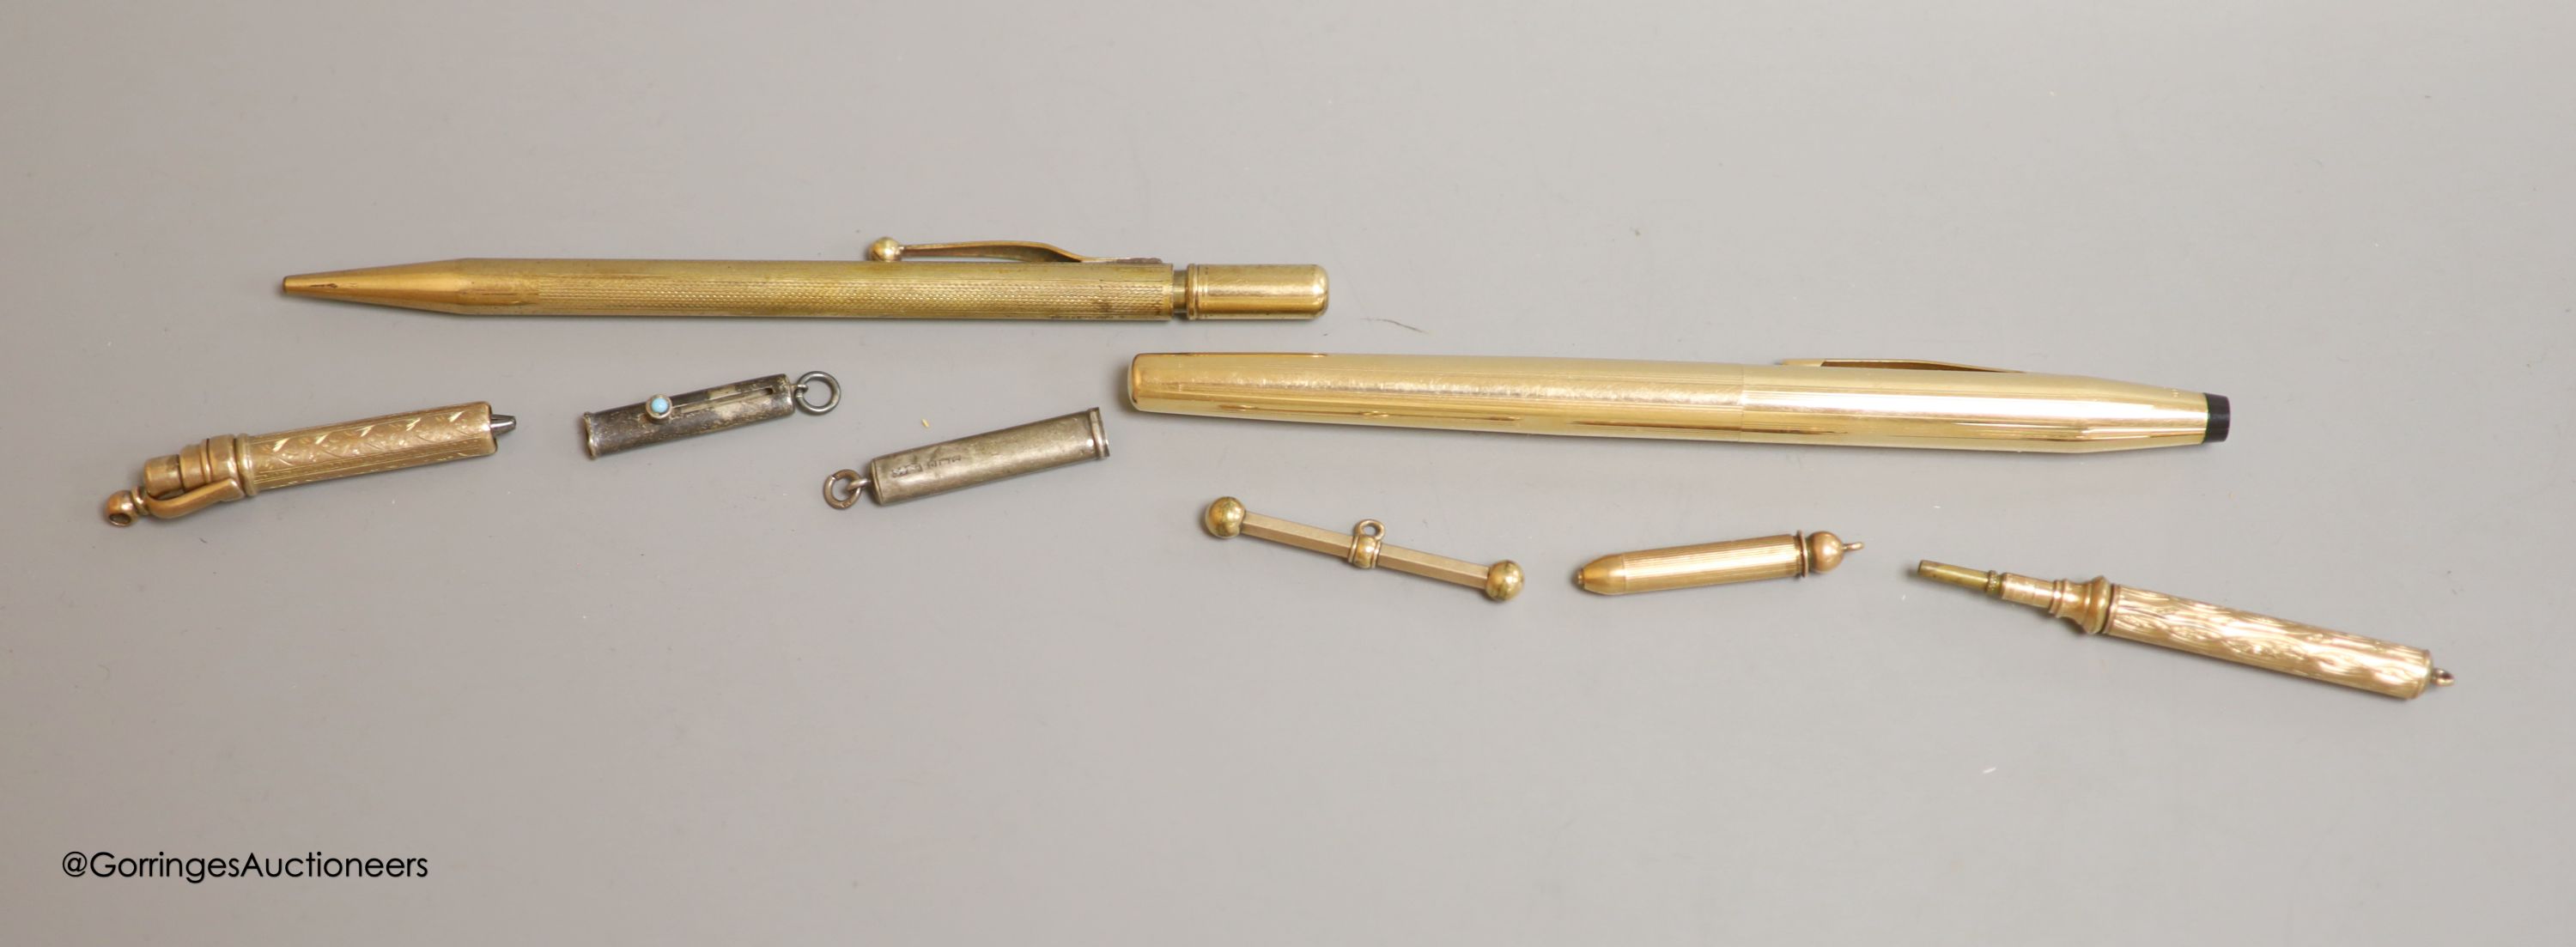 Rolled gold pens and pencils including a T-bar and two silver cased pencils.